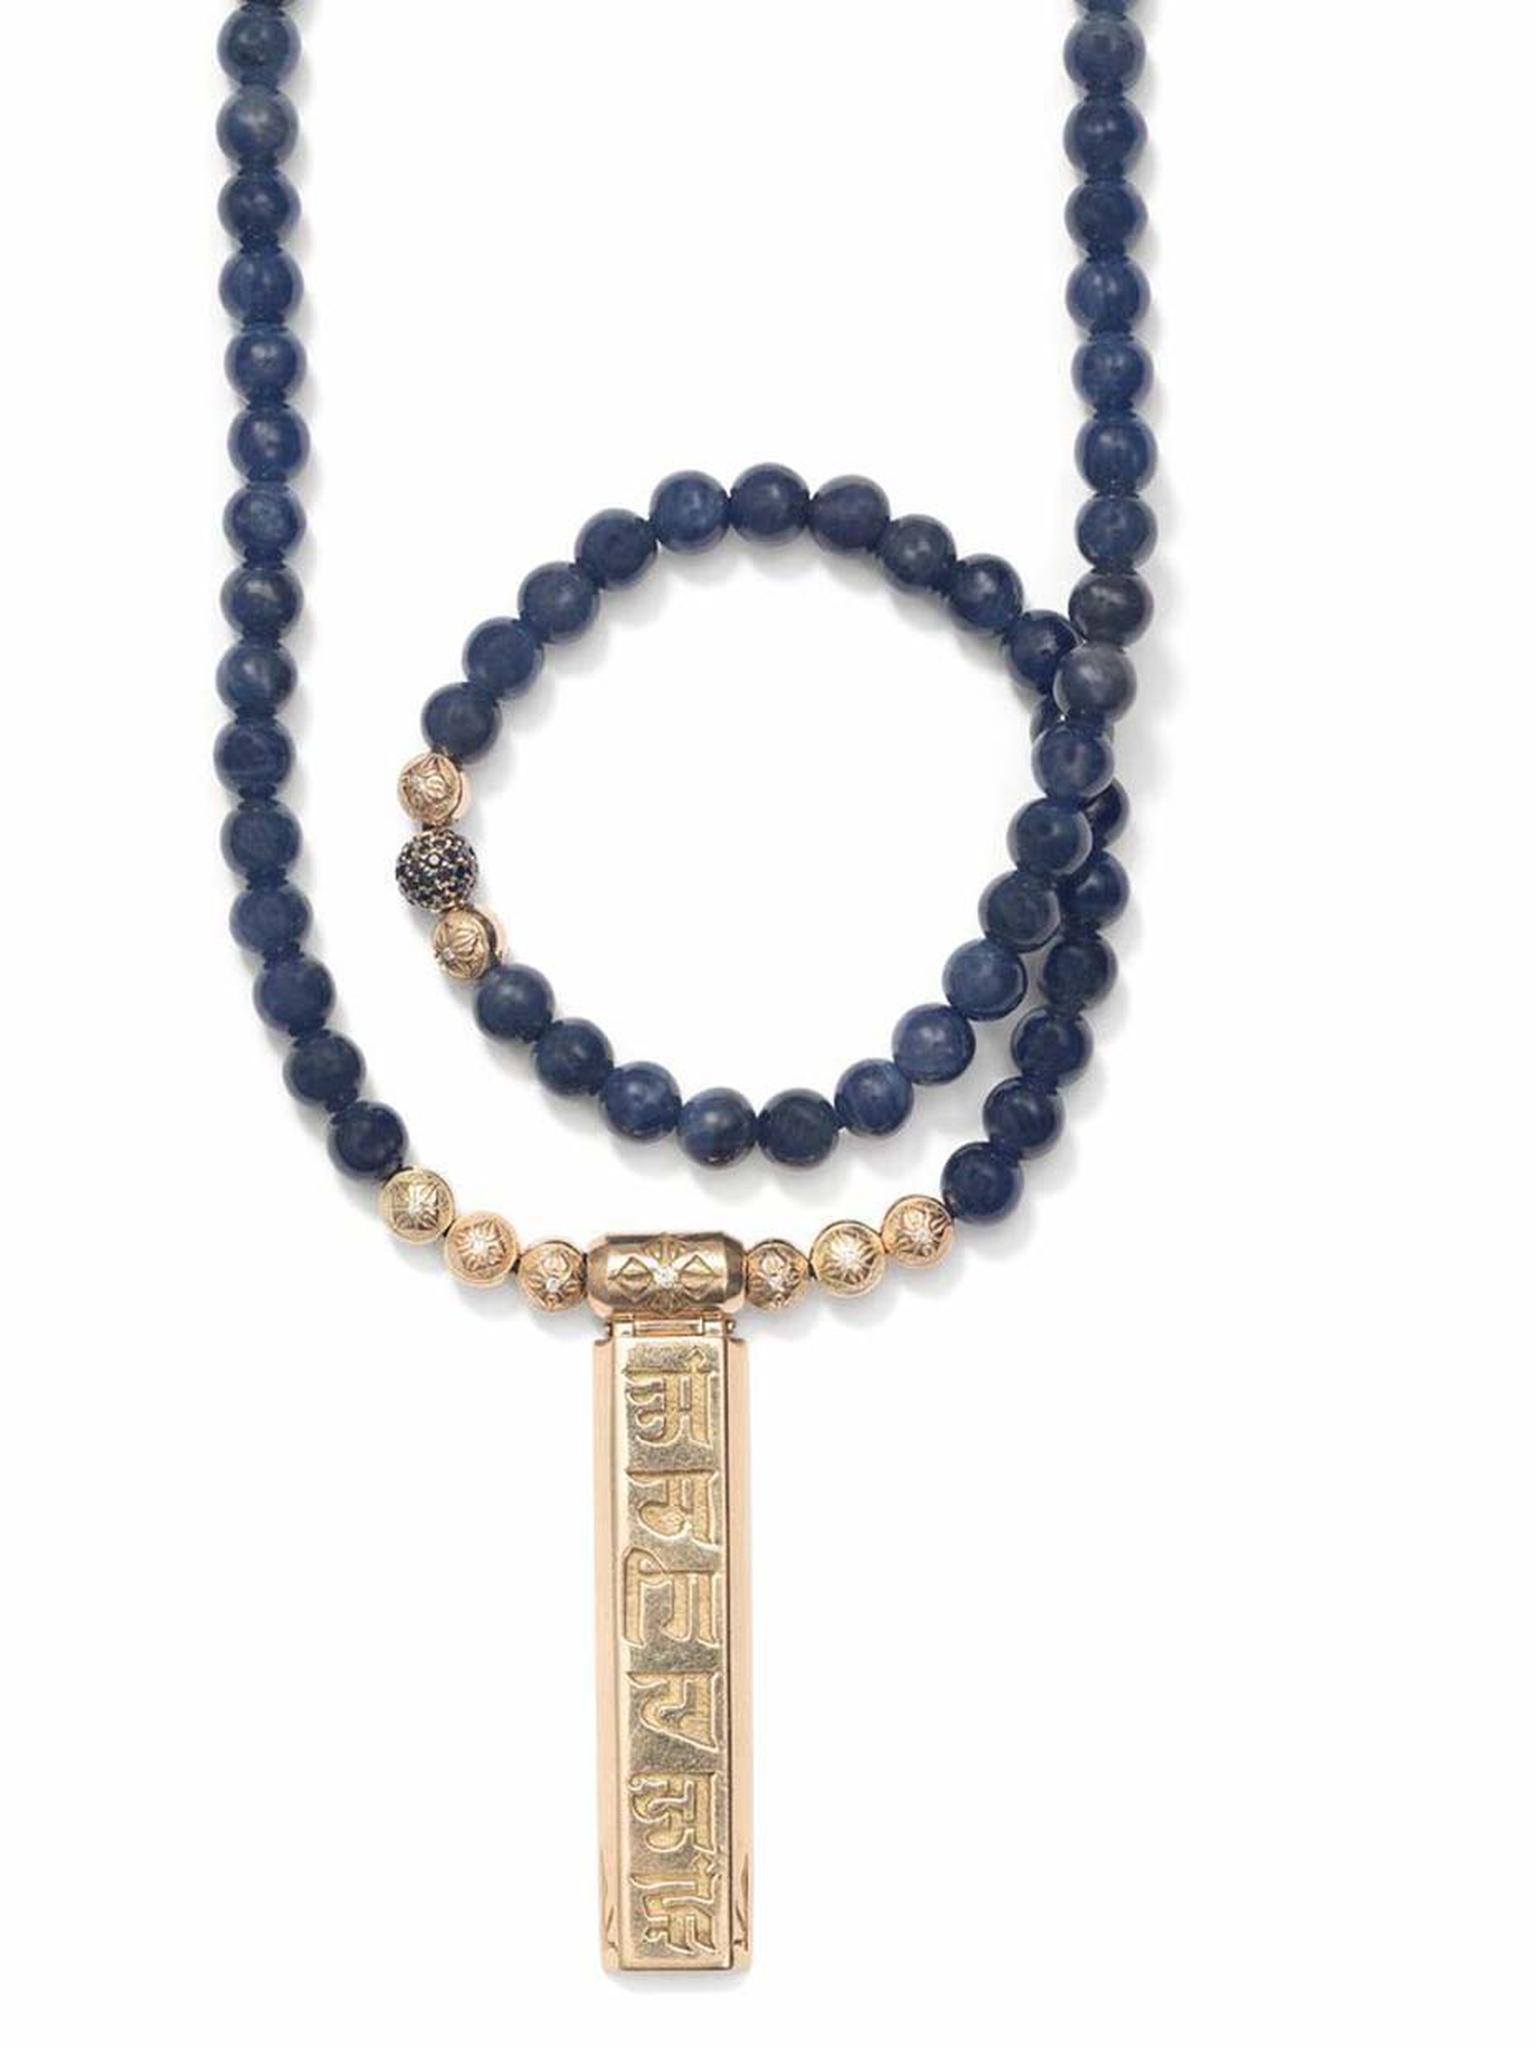 Shamballa Jewels Gold Bar necklace with blue sapphires.